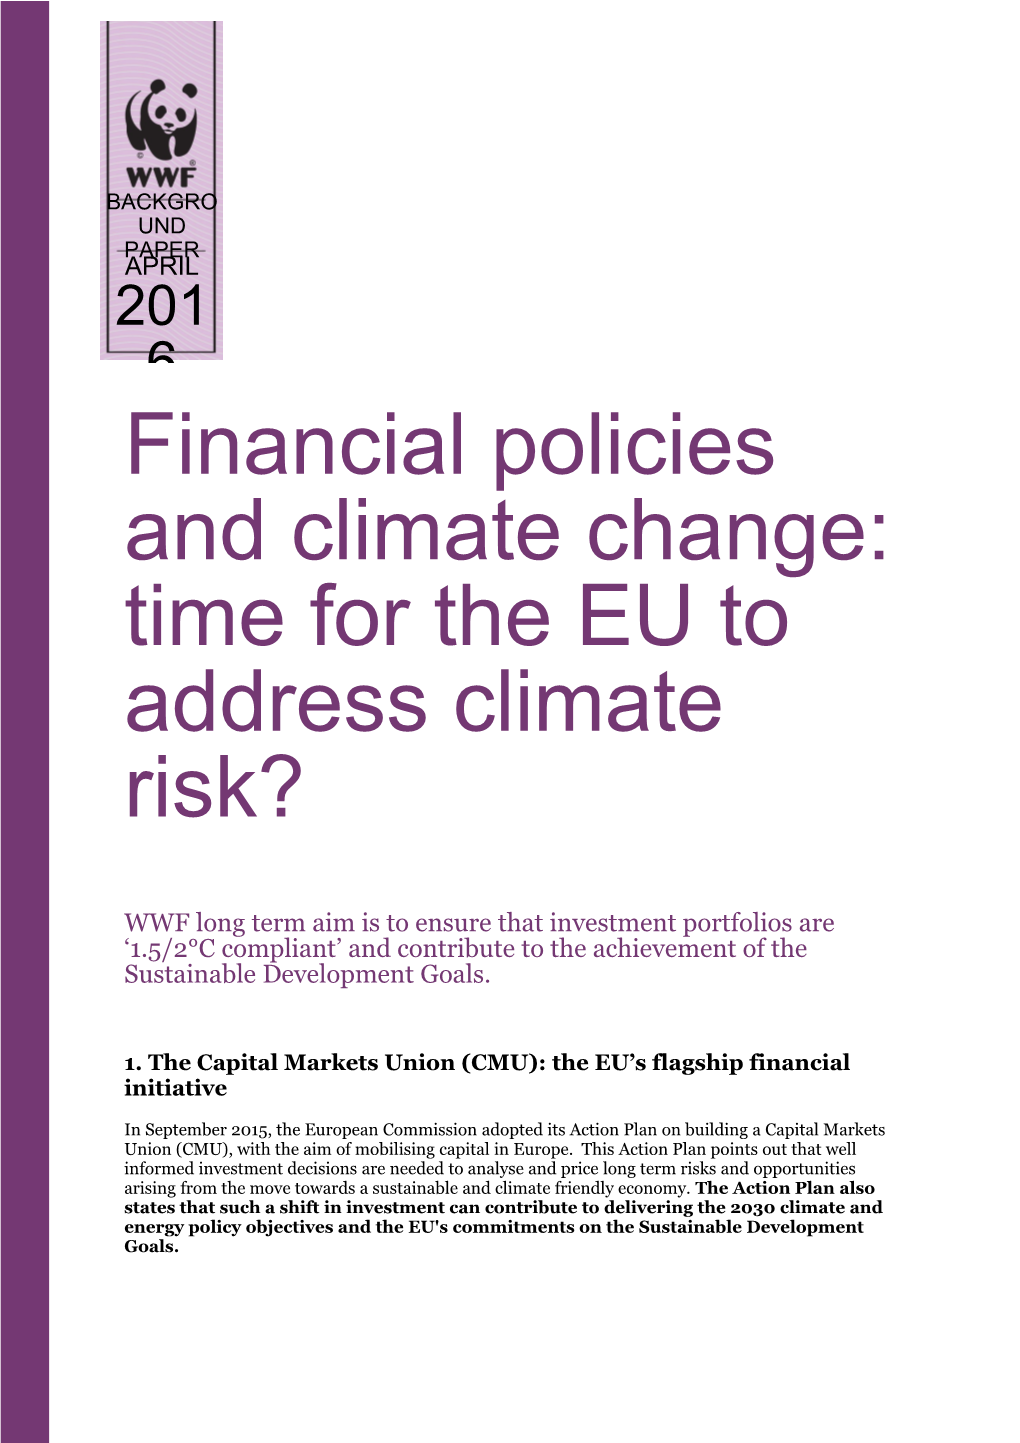 Financial Policies and Climate Change: Time for the EU to Address Climate Risk?